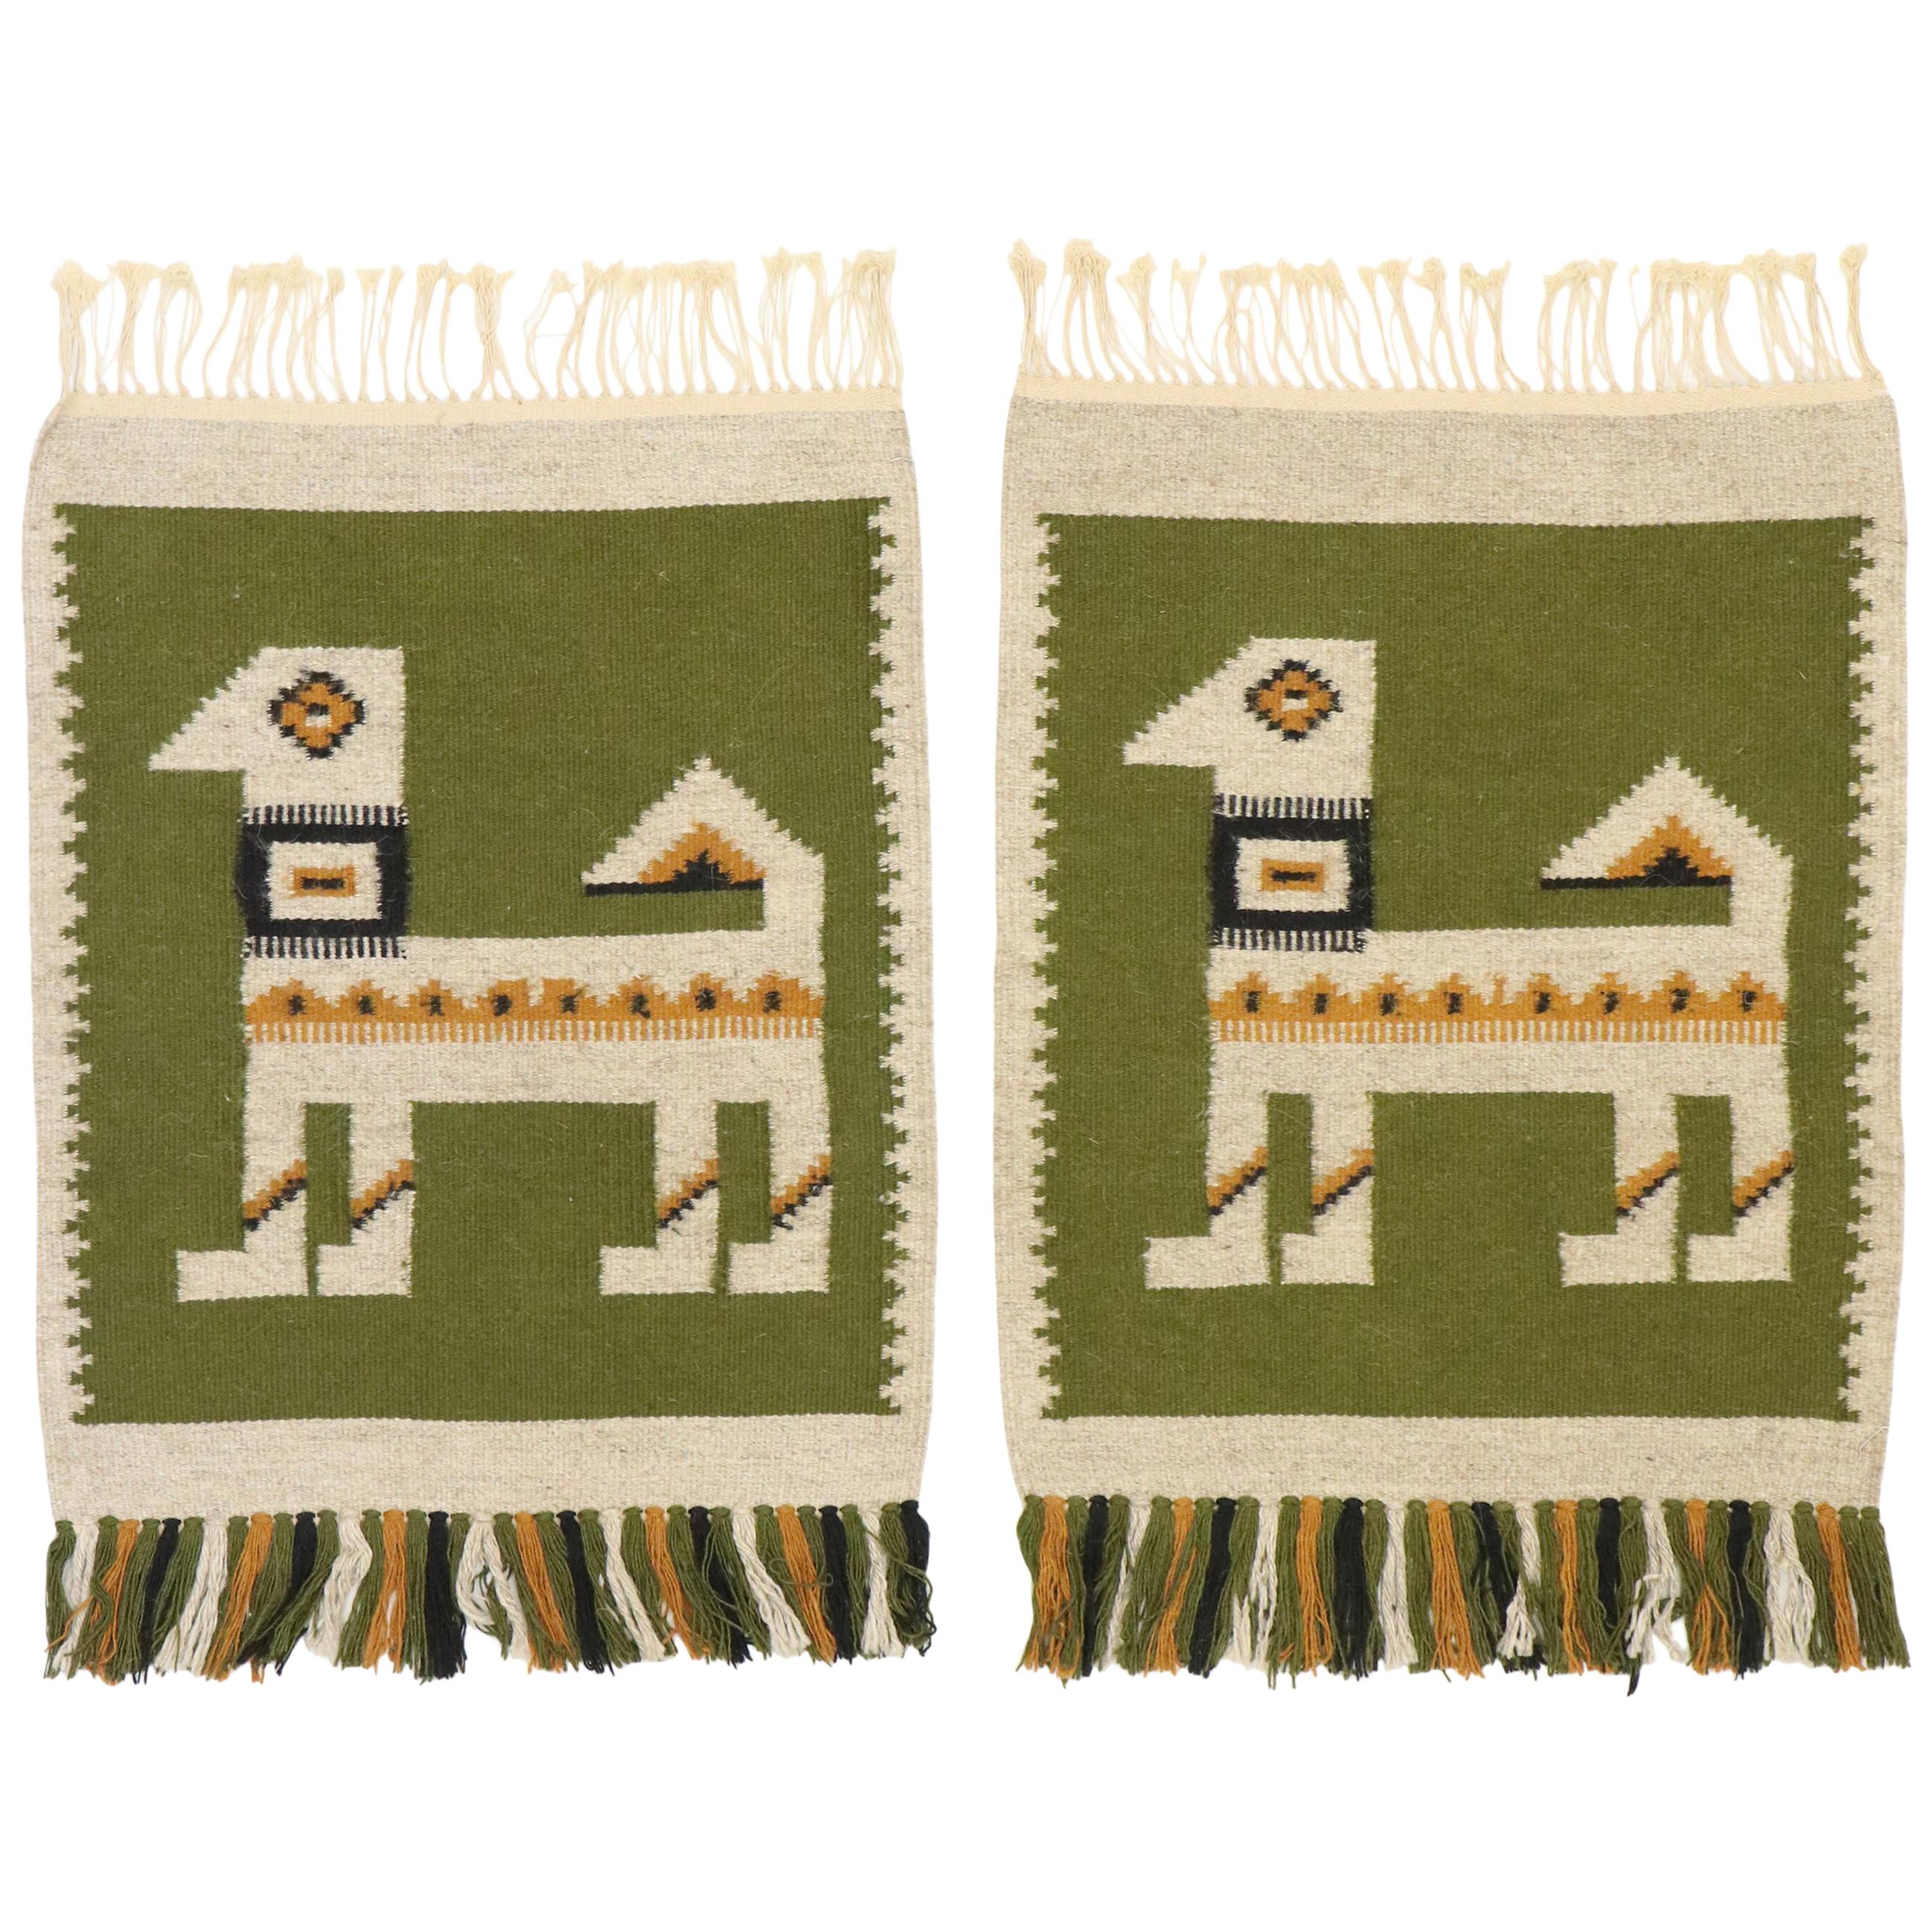 Matching Pair of Vintage Russian Kilim Rugs with Folk Art Style